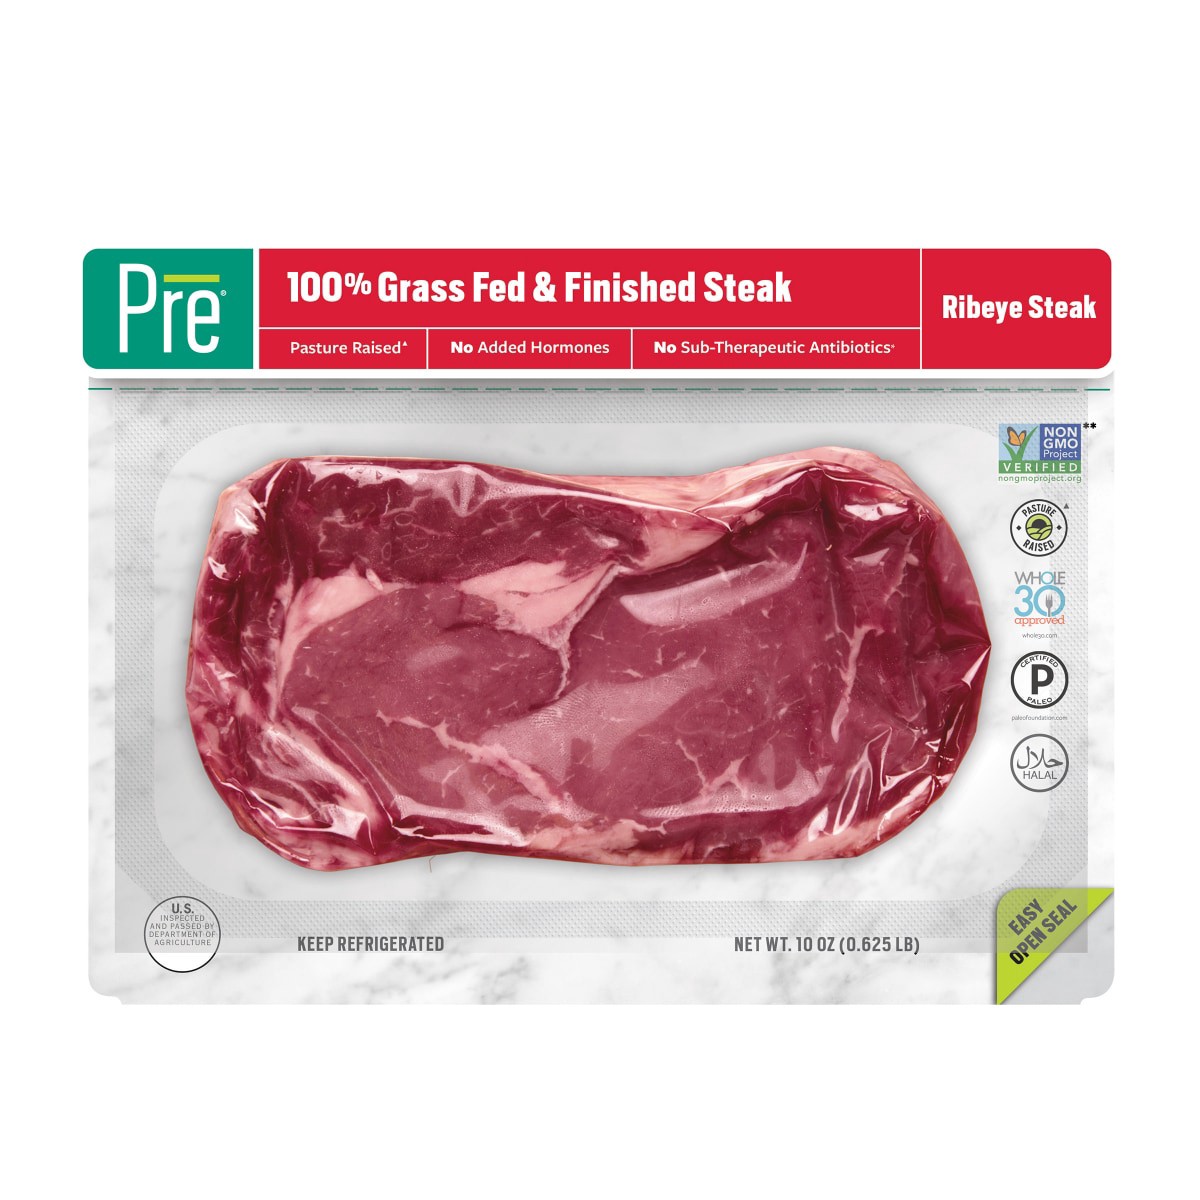 slide 1 of 21, Pre, Ribeye Steak 100% Grass-Fed, Grass-Finished, and Pasture-Raised Beef, 10 oz